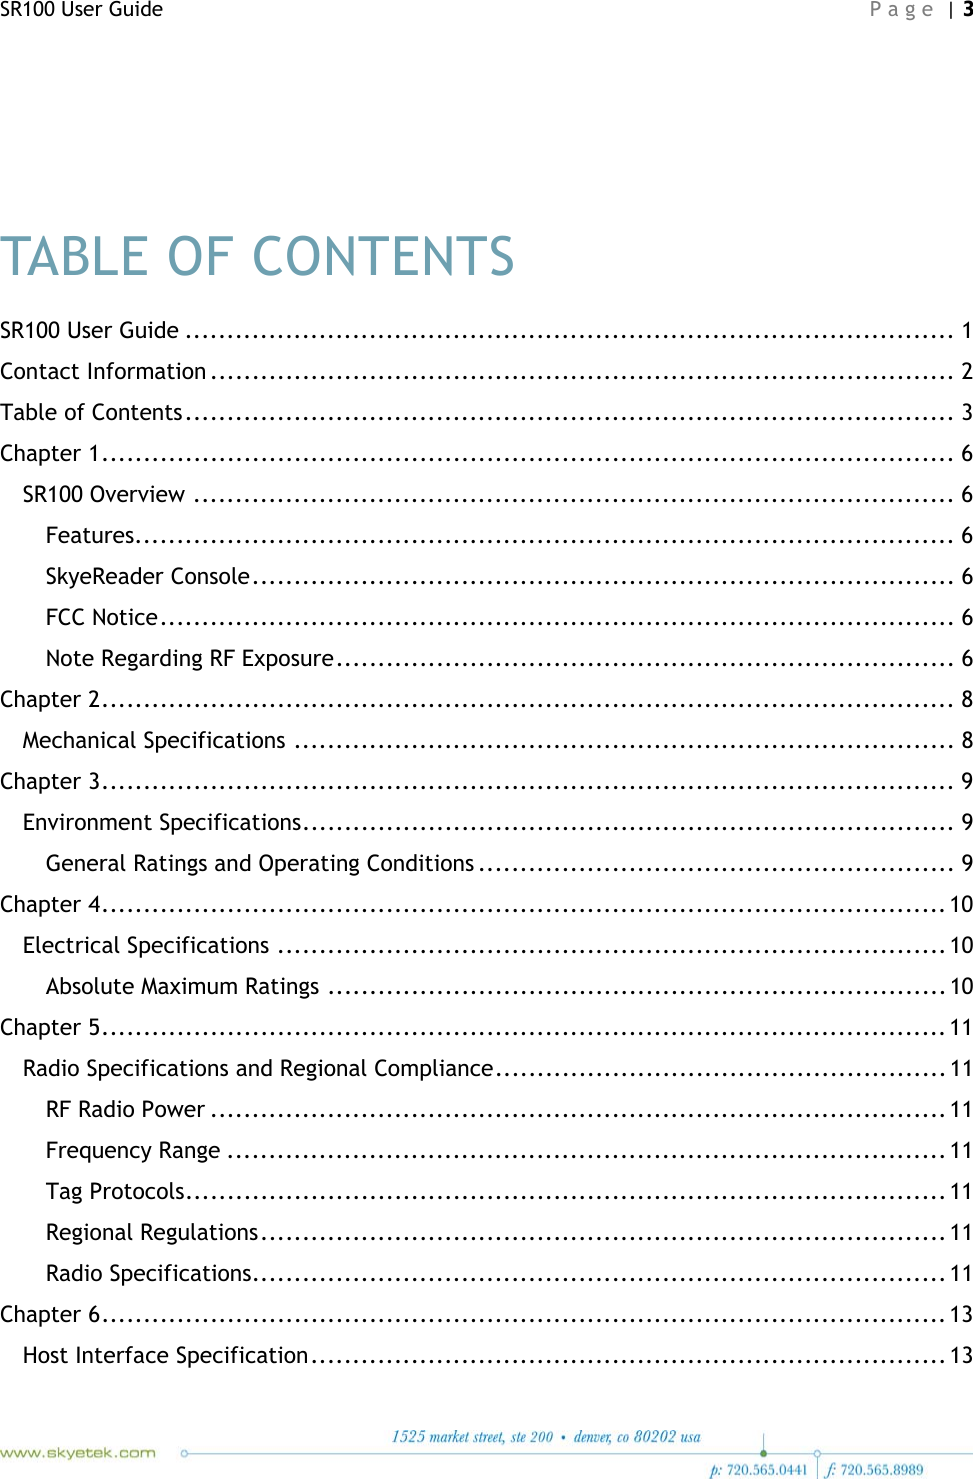 SR100 User Guide    Page | 3     TABLE OF CONTENTS SR100 User Guide ............................................................................................ 1 Contact Information .........................................................................................  2 Table of Contents ............................................................................................  3 Chapter 1 ...................................................................................................... 6 SR100 Overview ........................................................................................... 6 Features.................................................................................................. 6 SkyeReader Console .................................................................................... 6 FCC Notice ............................................................................................... 6 Note Regarding RF Exposure .......................................................................... 6 Chapter 2 ...................................................................................................... 8 Mechanical Specifications ............................................................................... 8 Chapter 3 ...................................................................................................... 9 Environment Specifications .............................................................................. 9 General Ratings and Operating Conditions ......................................................... 9 Chapter 4 ..................................................................................................... 10 Electrical Specifications ................................................................................ 10 Absolute Maximum Ratings .......................................................................... 10 Chapter 5 ..................................................................................................... 11 Radio Specifications and Regional Compliance ...................................................... 11 RF Radio Power ........................................................................................ 11 Frequency Range ...................................................................................... 11 Tag Protocols ........................................................................................... 11 Regional Regulations ..................................................................................  11 Radio Specifications................................................................................... 11 Chapter 6 ..................................................................................................... 13 Host Interface Specification ............................................................................  13 